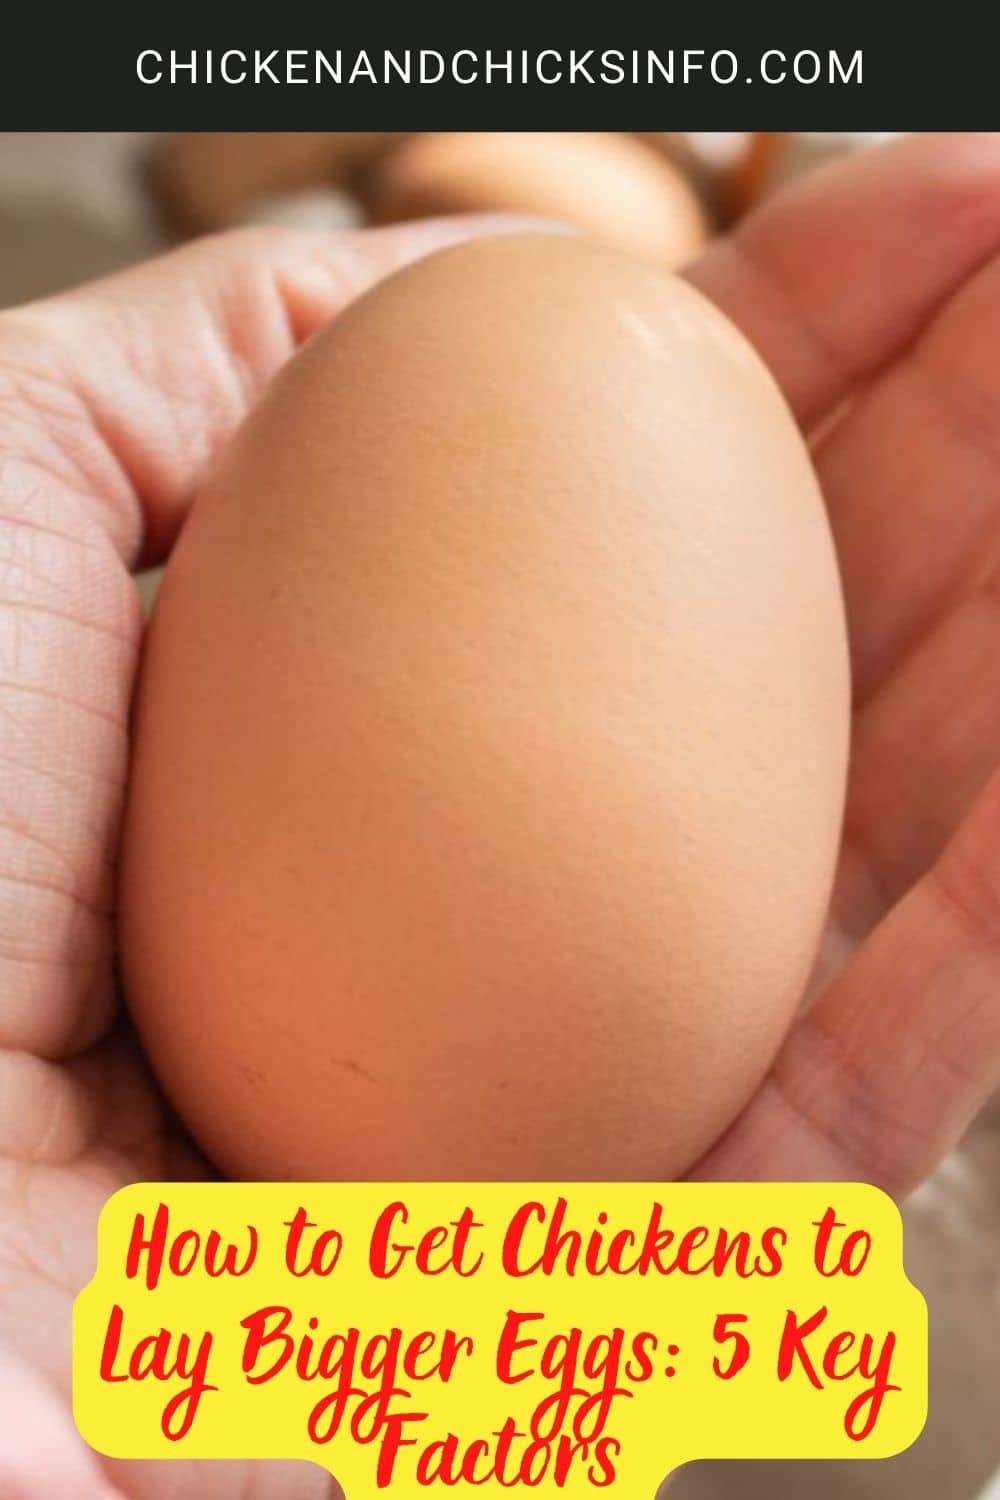 How to Get Chickens to Lay Bigger Eggs: 5 Key Factors poster.